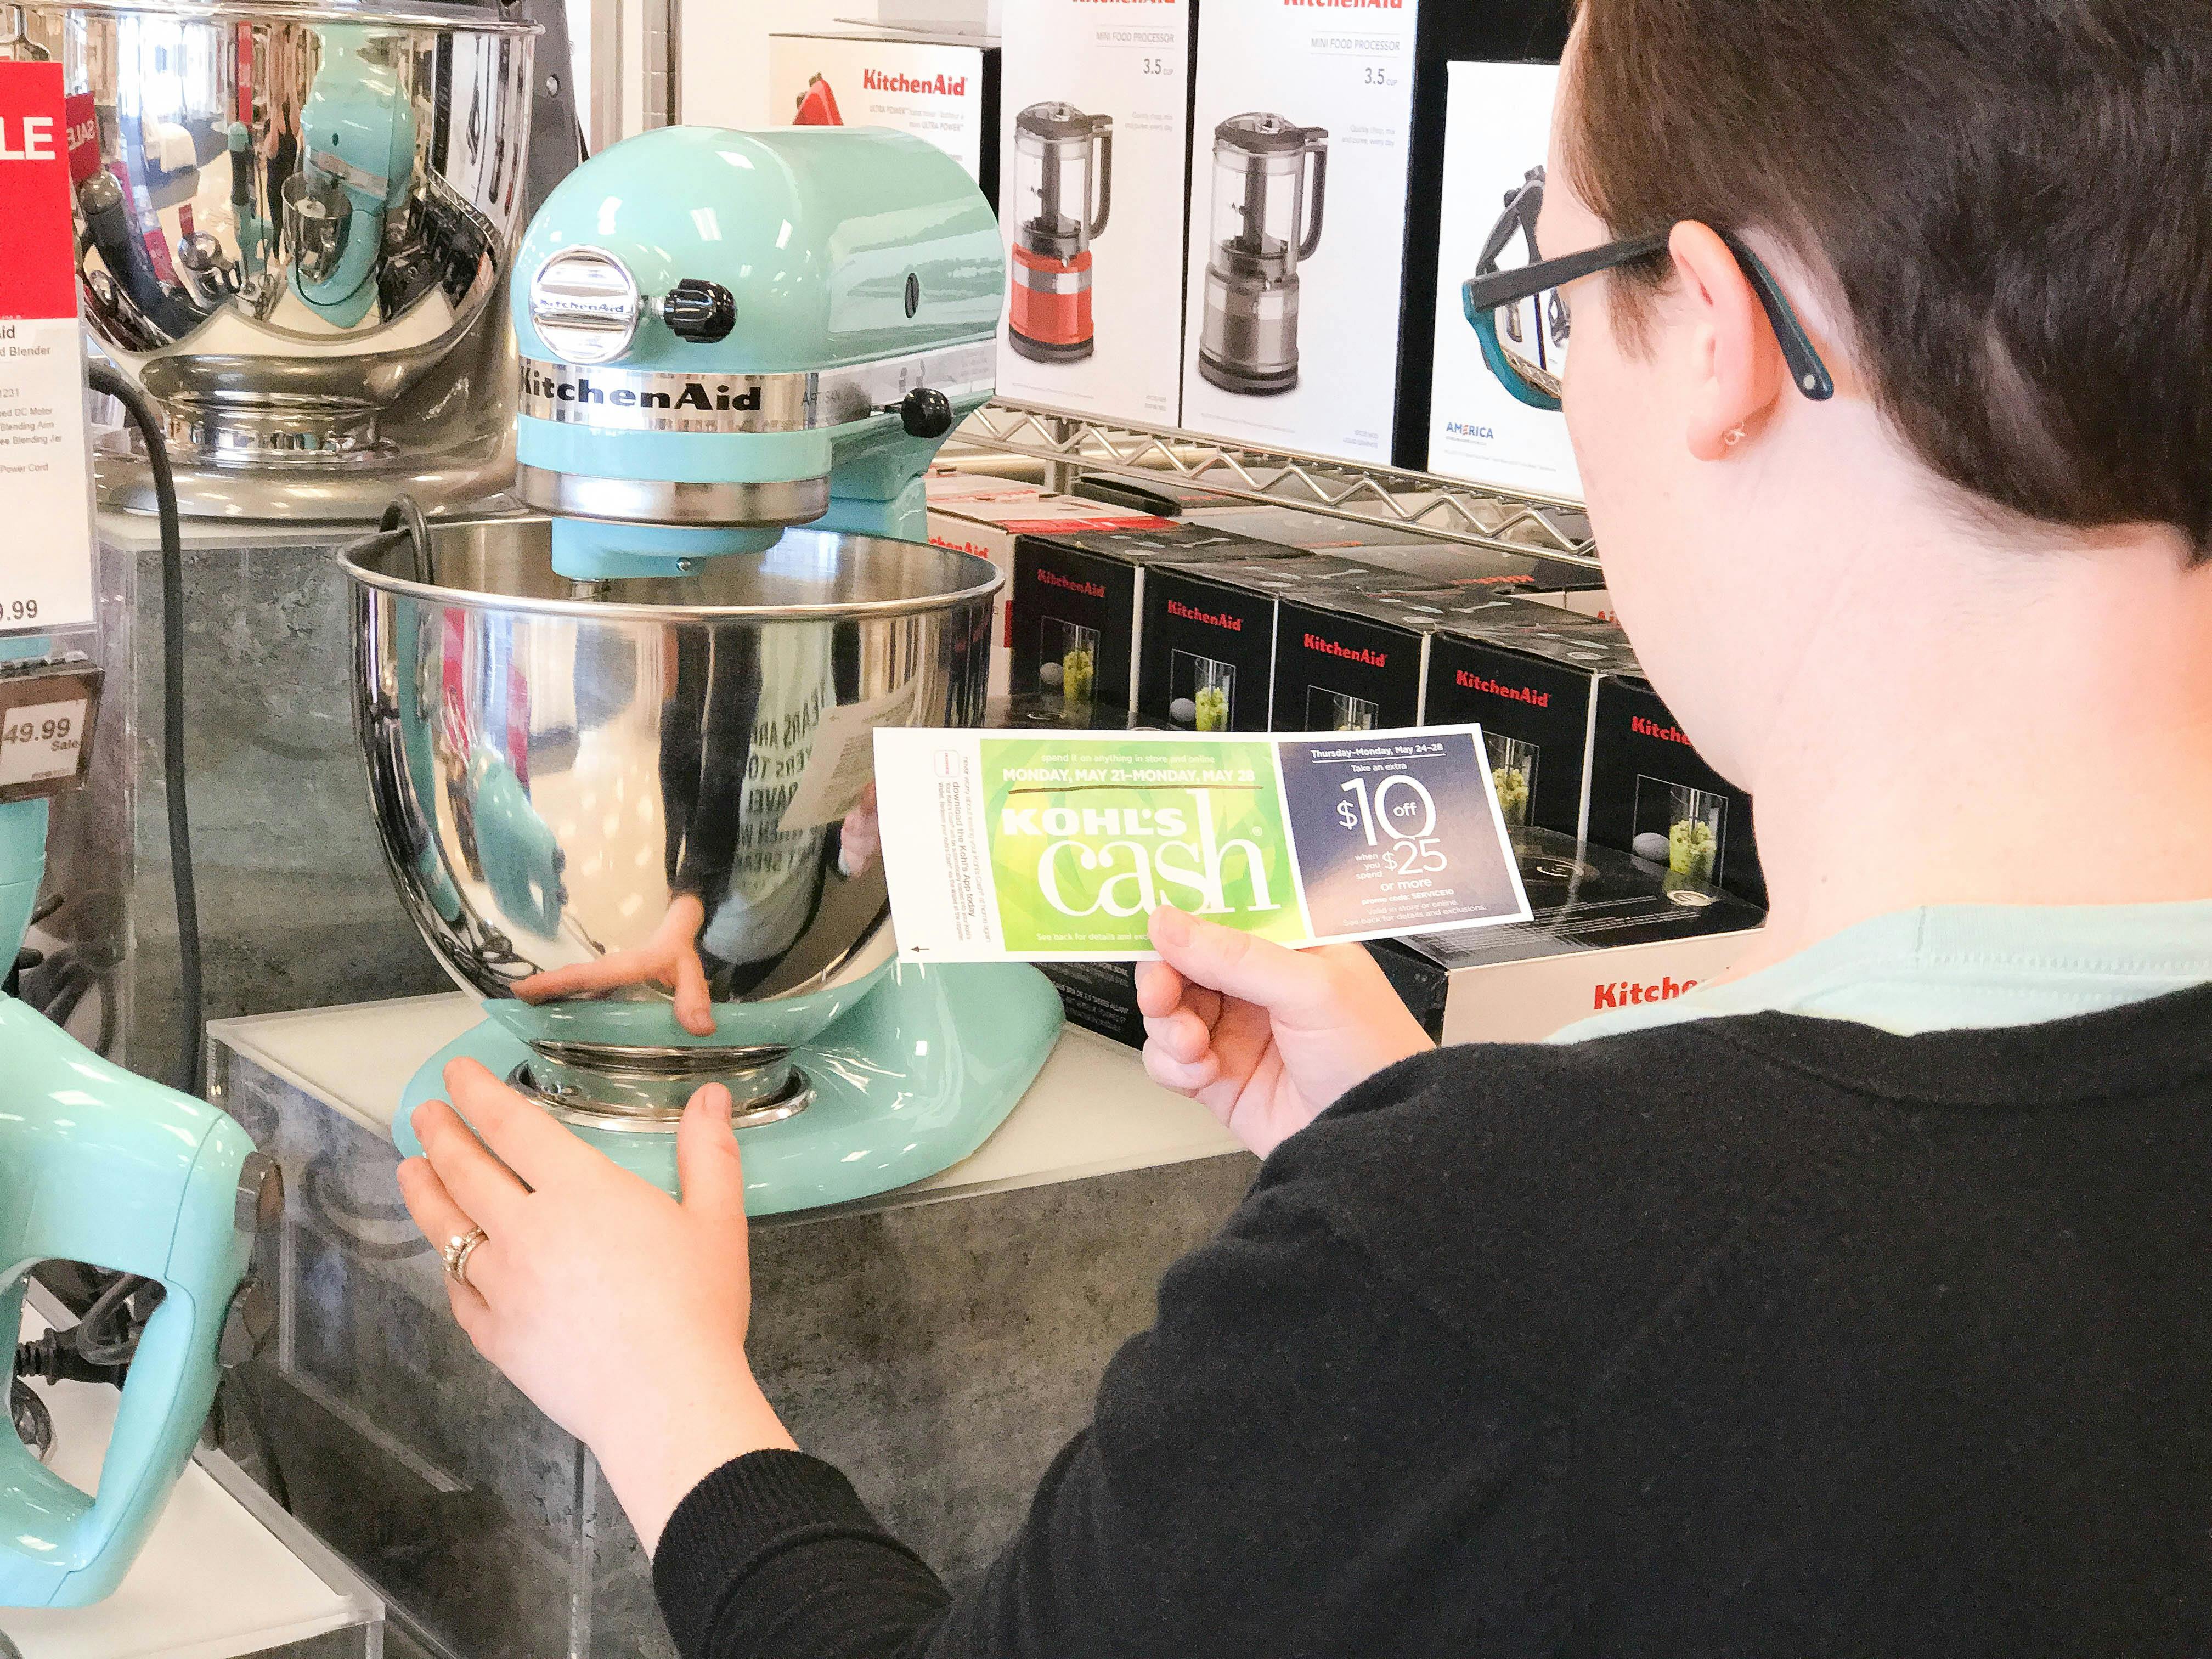 7 Tricks Finding a KitchenAid Mixer Sale - The Coupon Lady